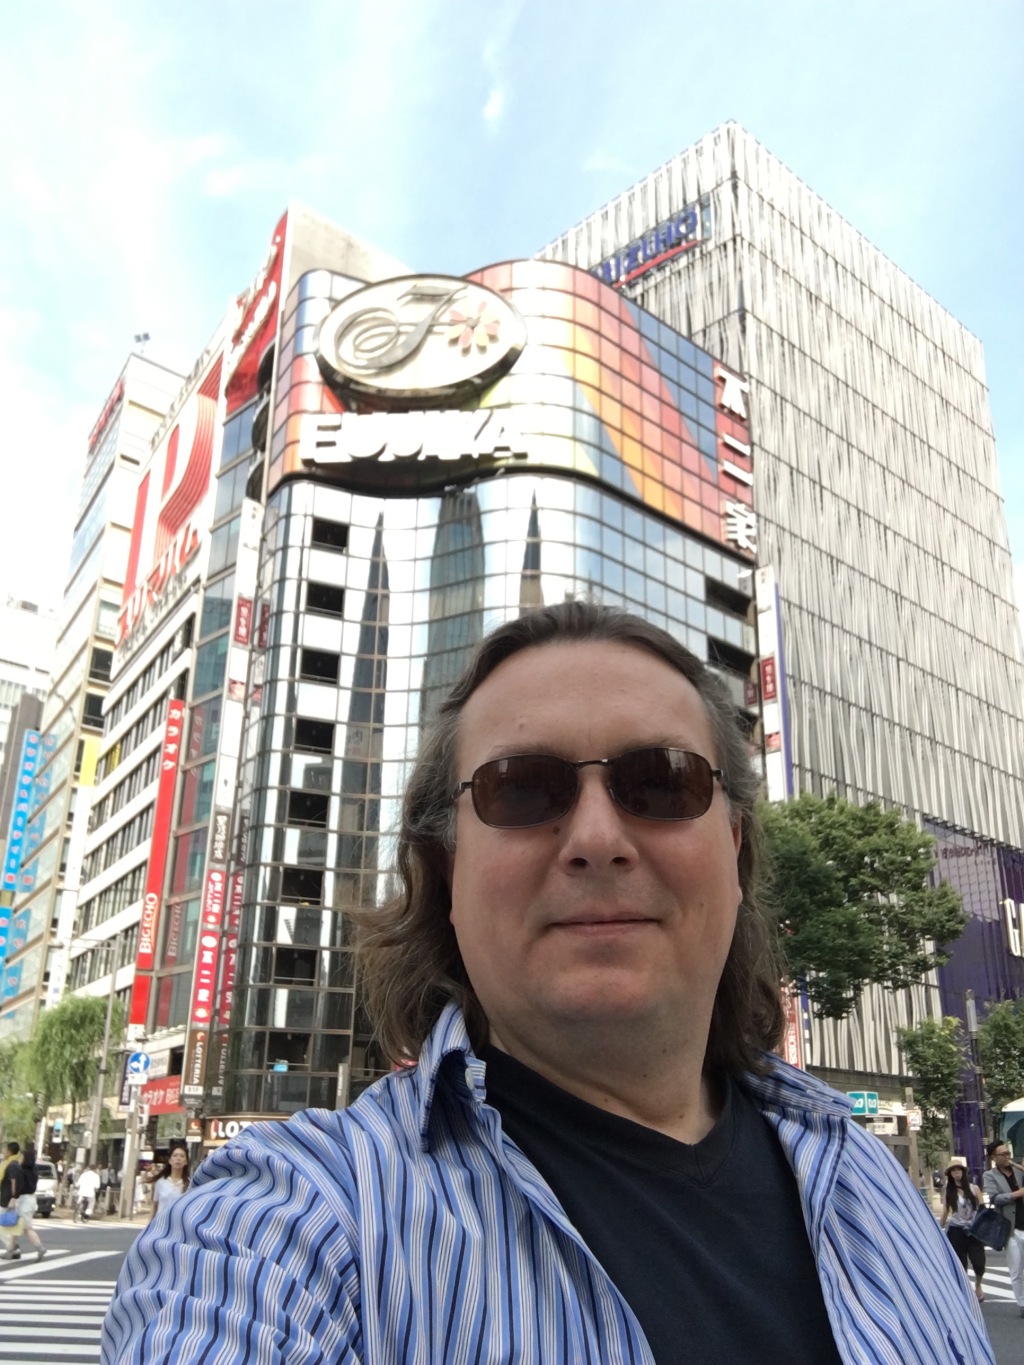 Japan and Europe – my first impression